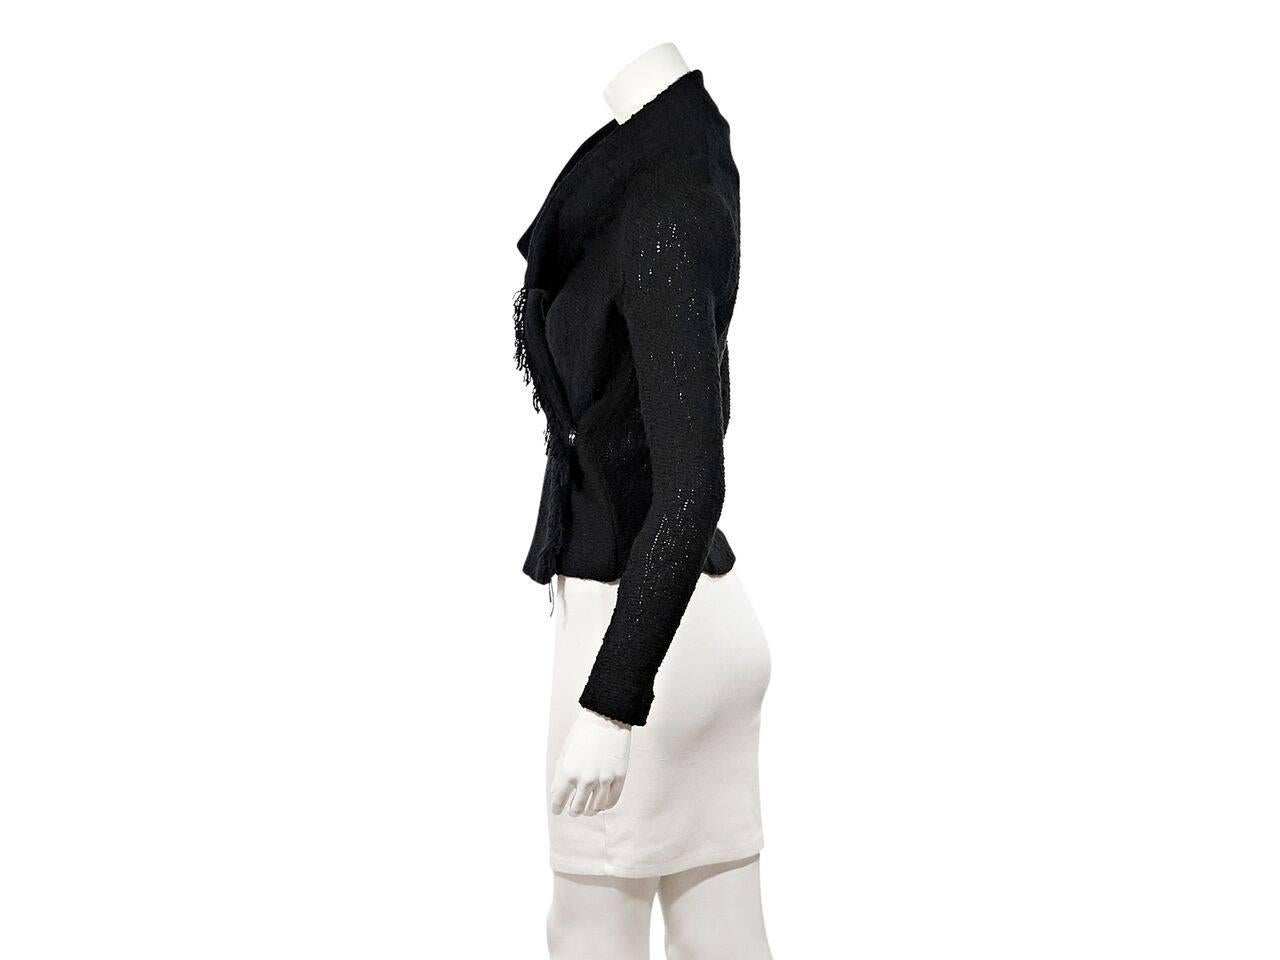 Product details:  Black woven moto jacket by Iro.  Fringed trim.  Long sleeves.  Concealed asymmetrical front closure.  Label size FR 34. 
Condition: Pre-owned. Very good.
Est. Retail $ 498.00